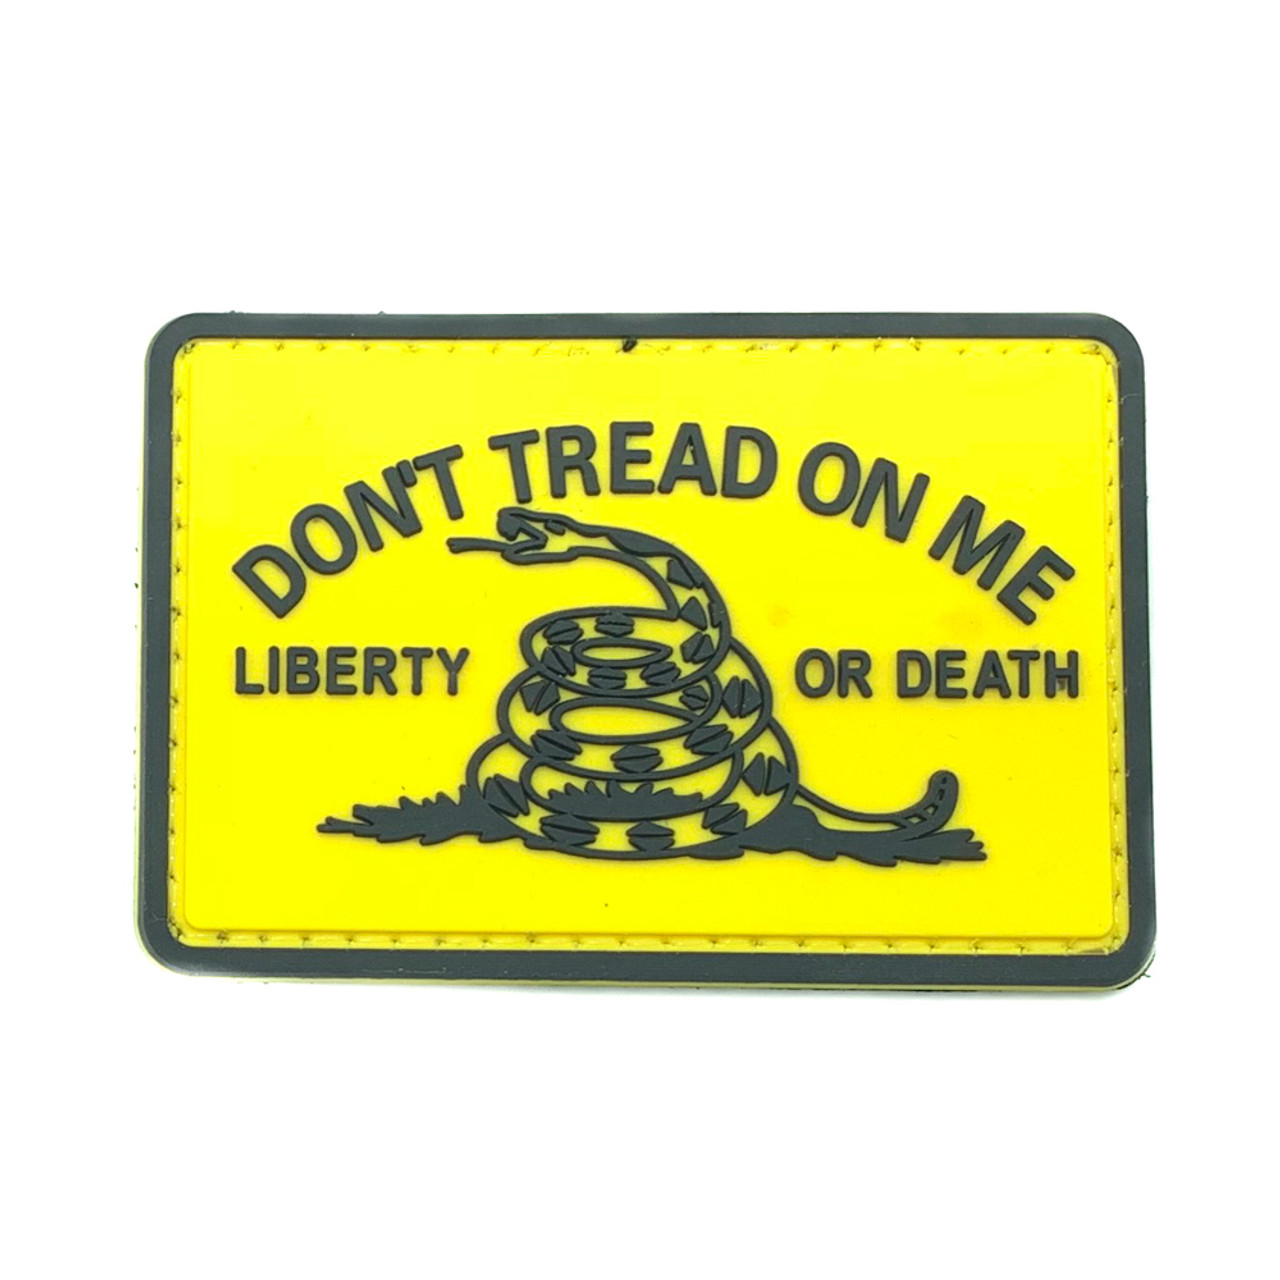 Don't Tread on Me PVC Patch